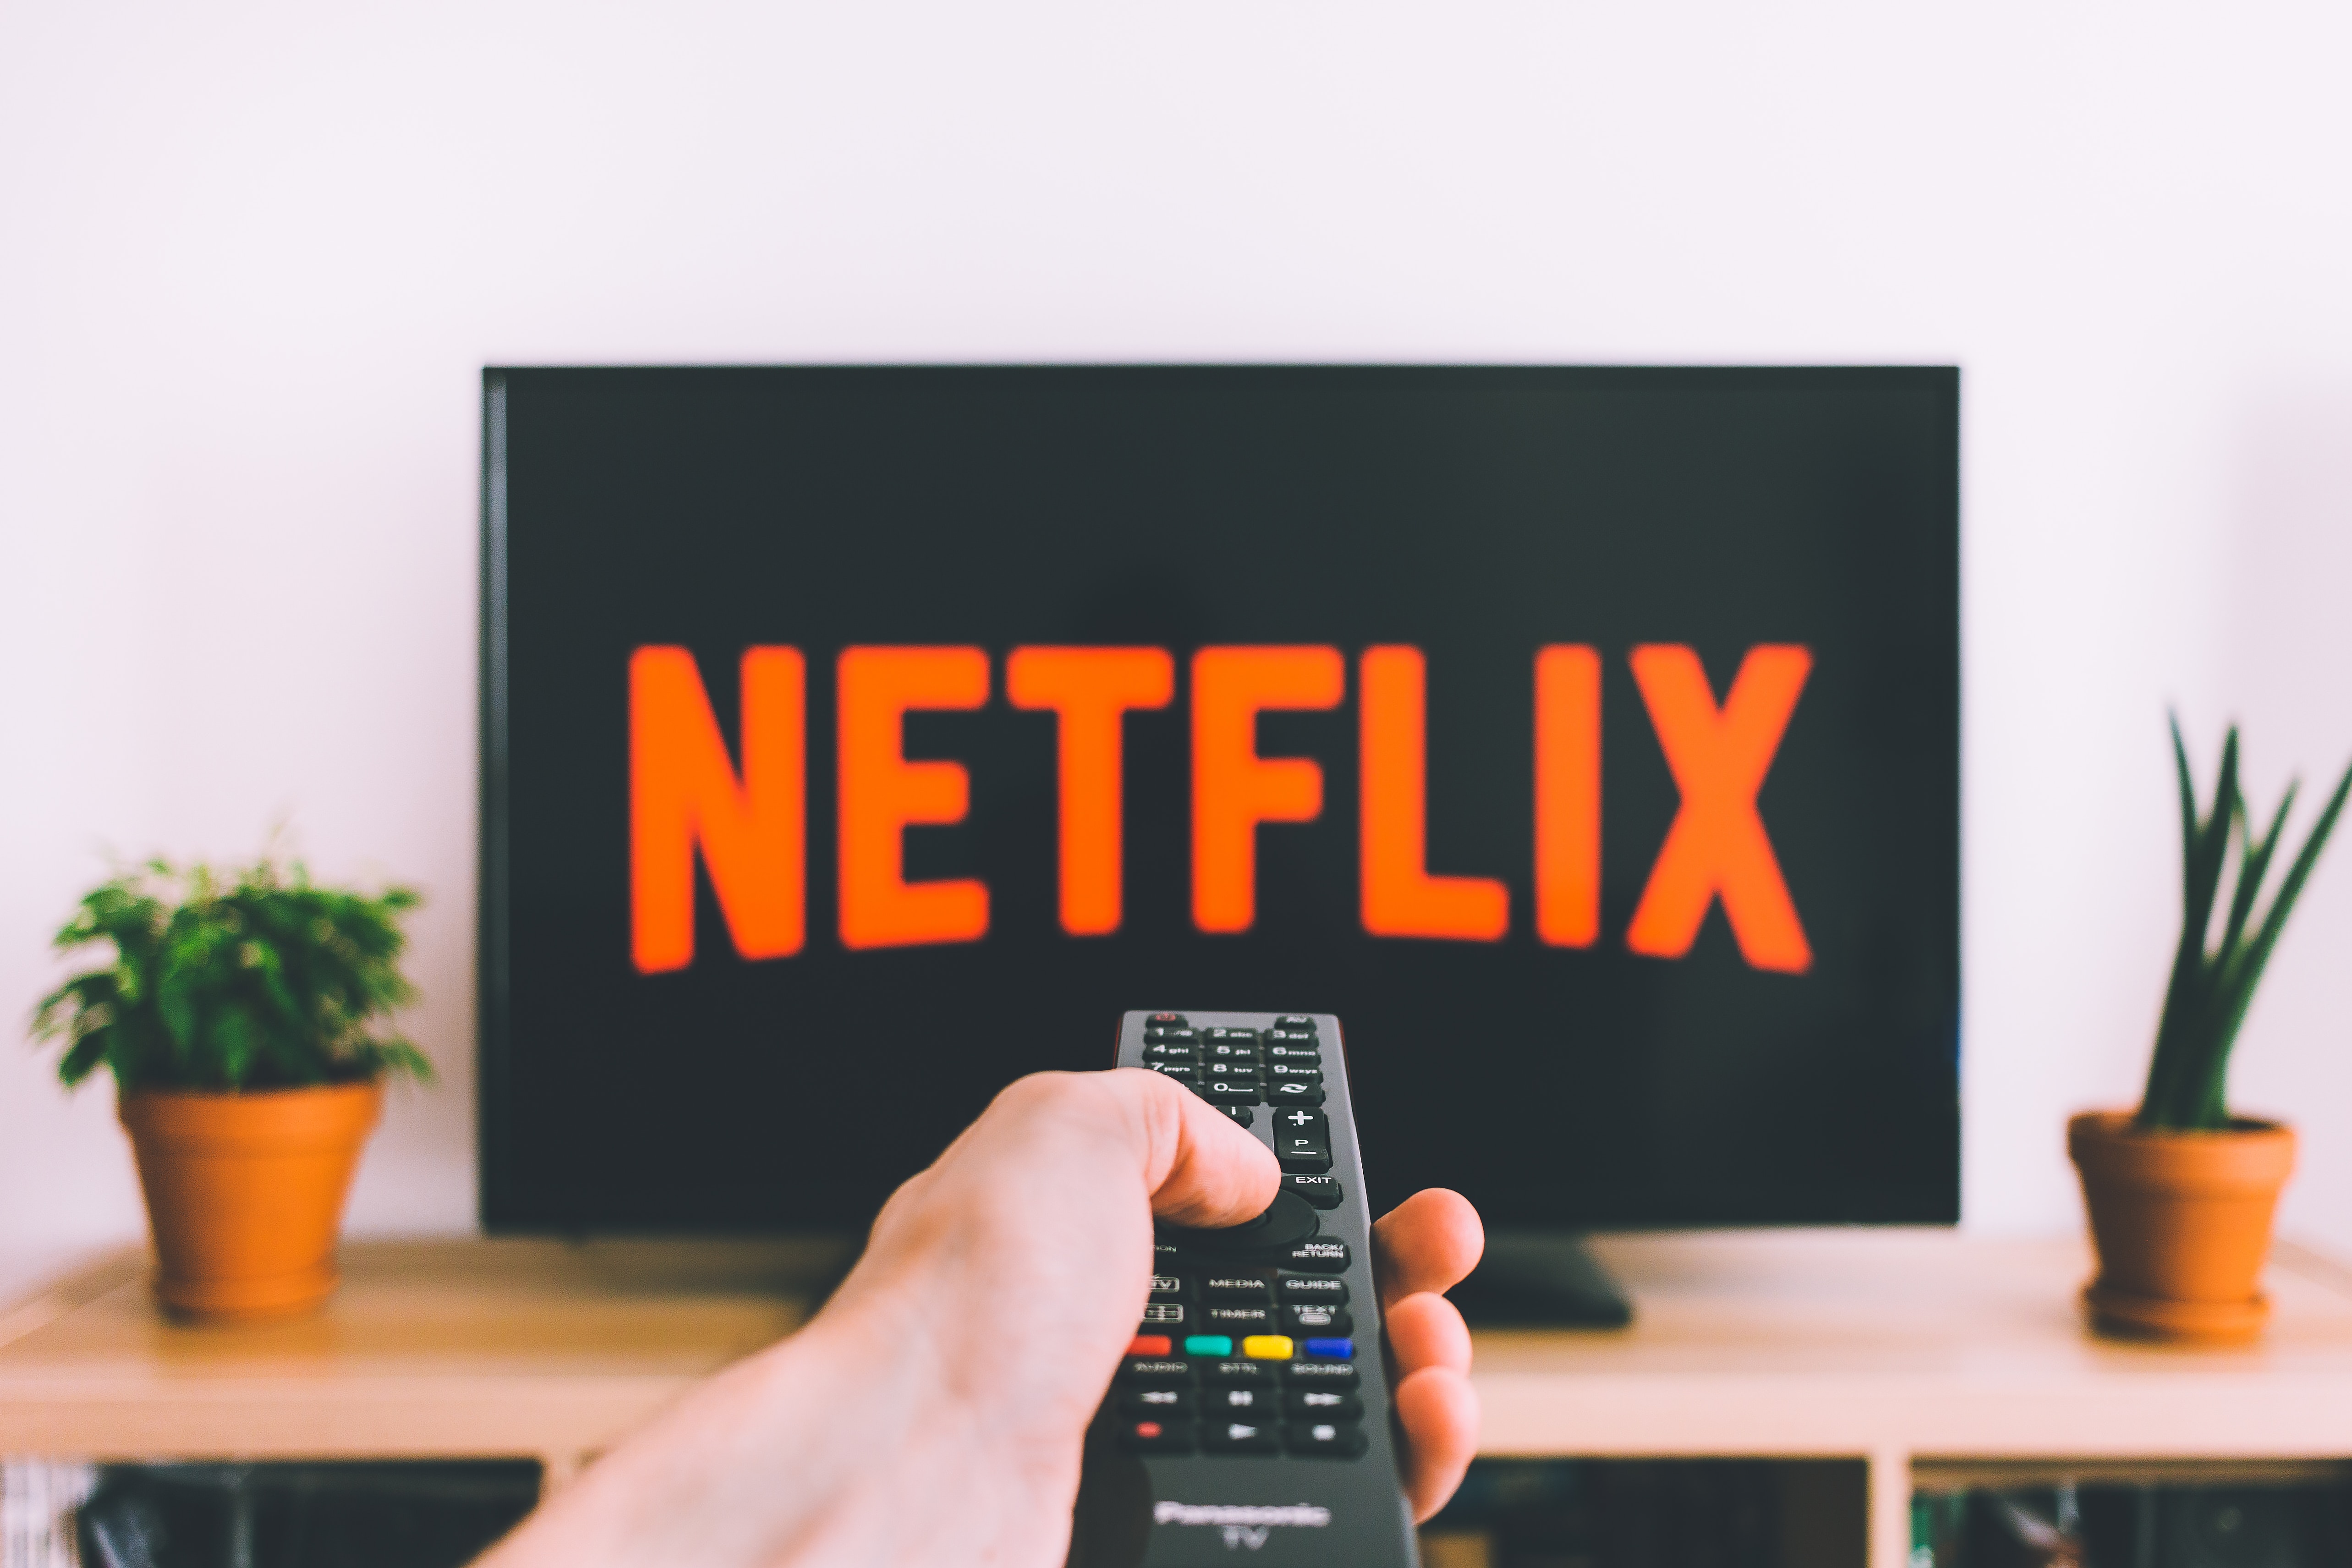 Asia sign-ups boost Netflix as COVID viewer boom fades